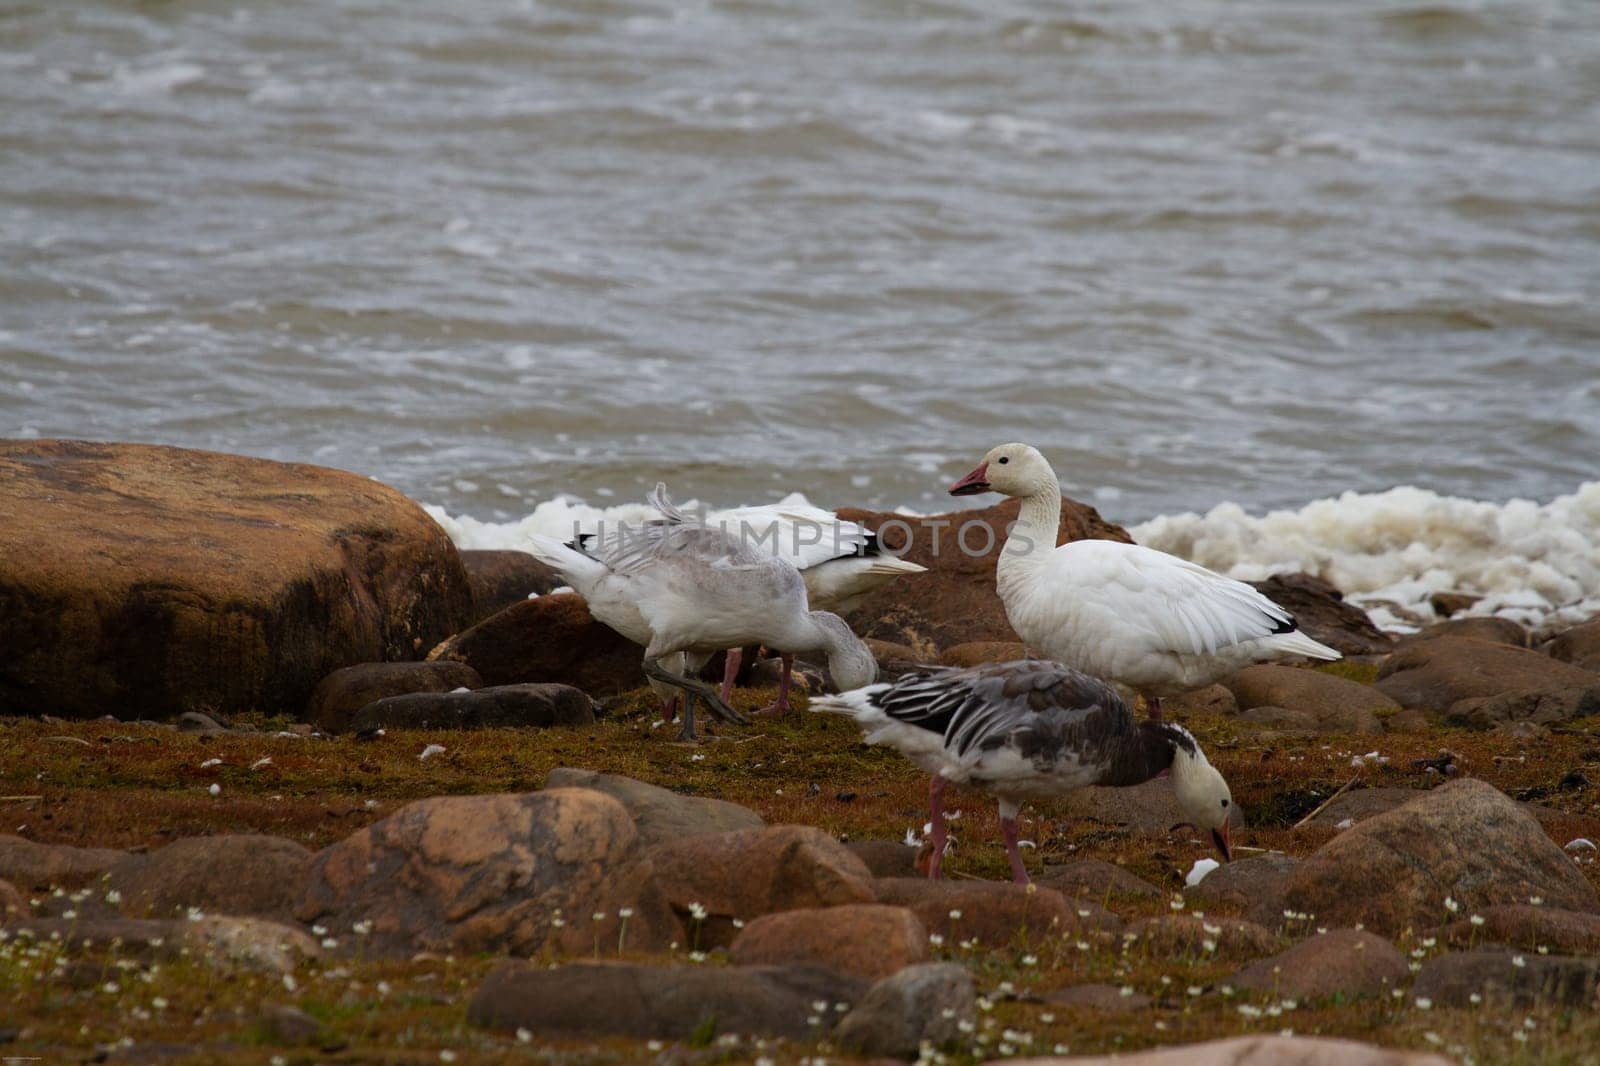 Snow geese, Anser caerulescens, in both white and blue morphs searching for food along arctic shoreline. Snow geese are native to North America and found migrating to the arctic in the summers.